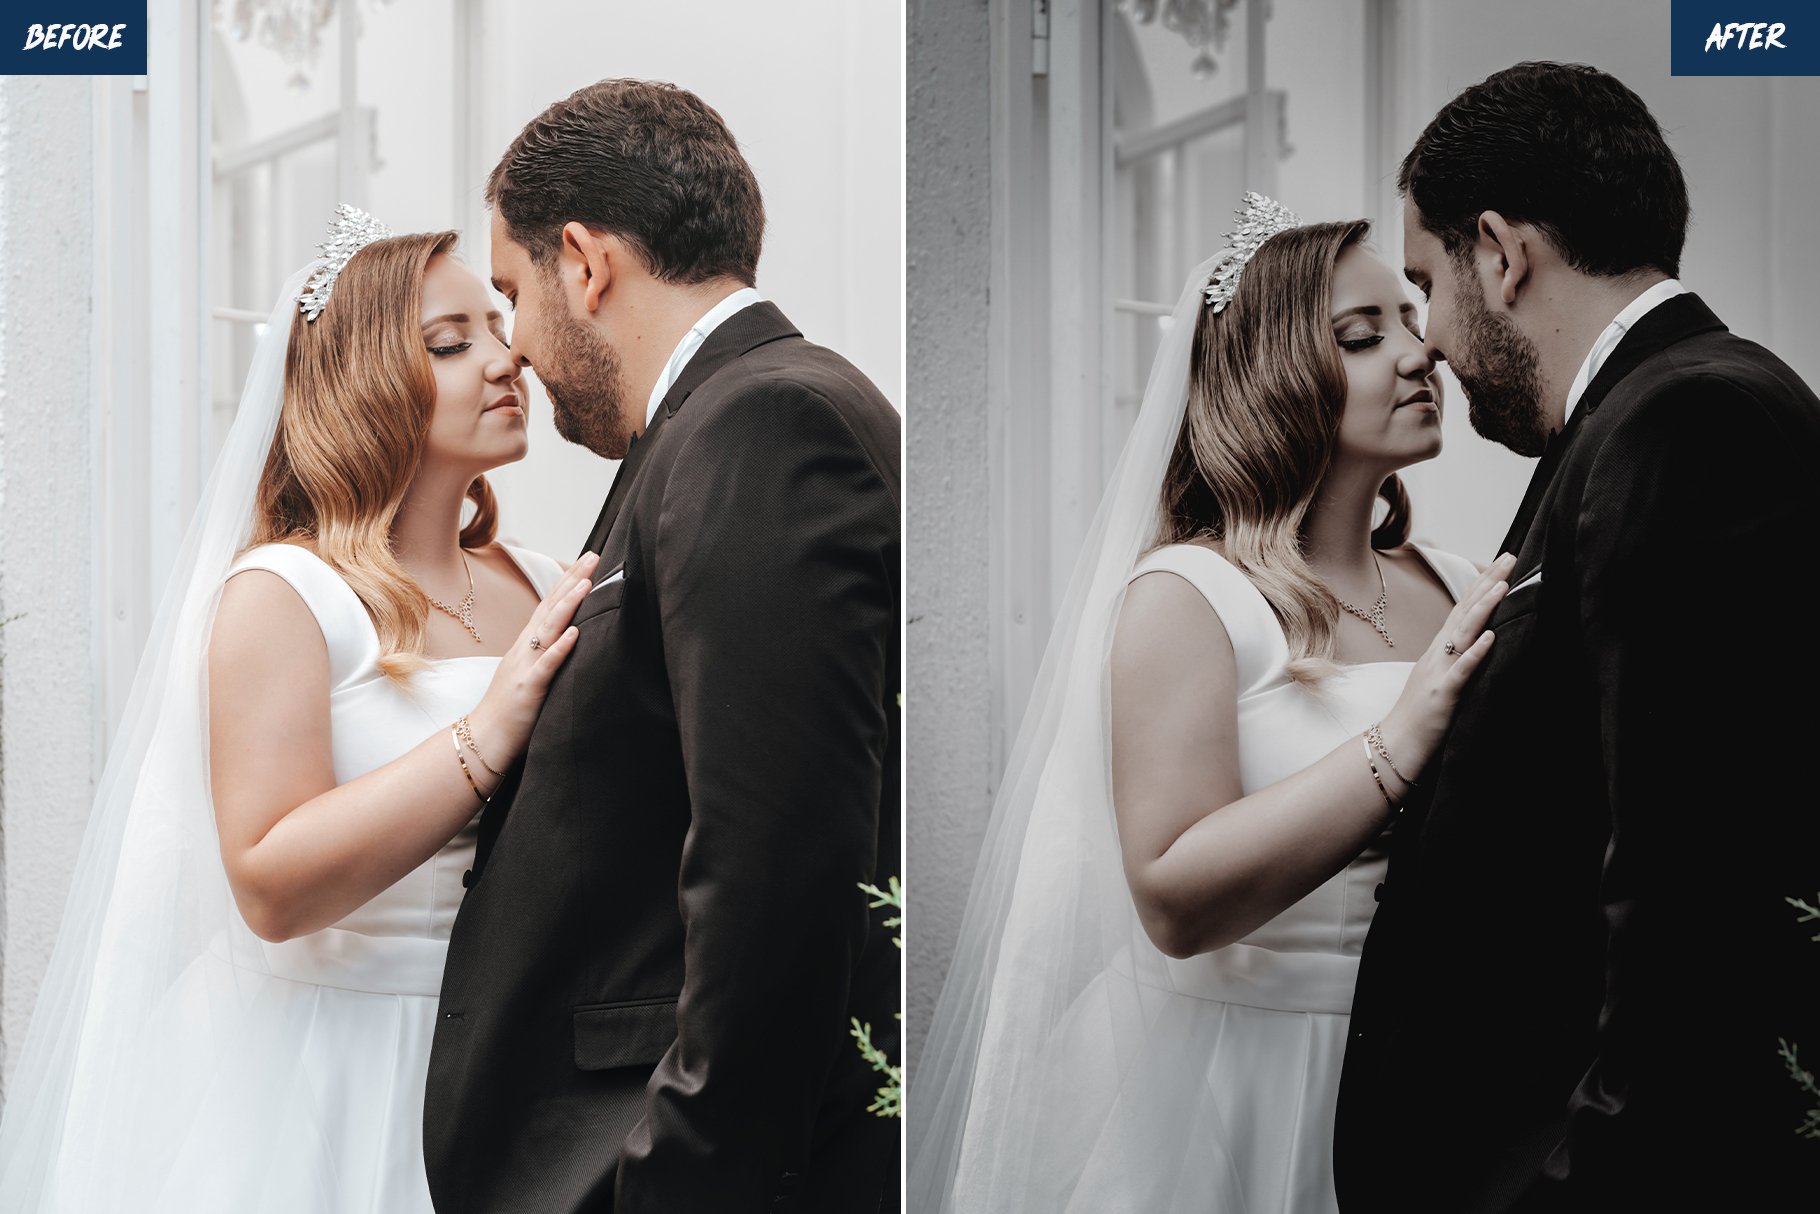 dark and moody wedding presets before and after 9 338